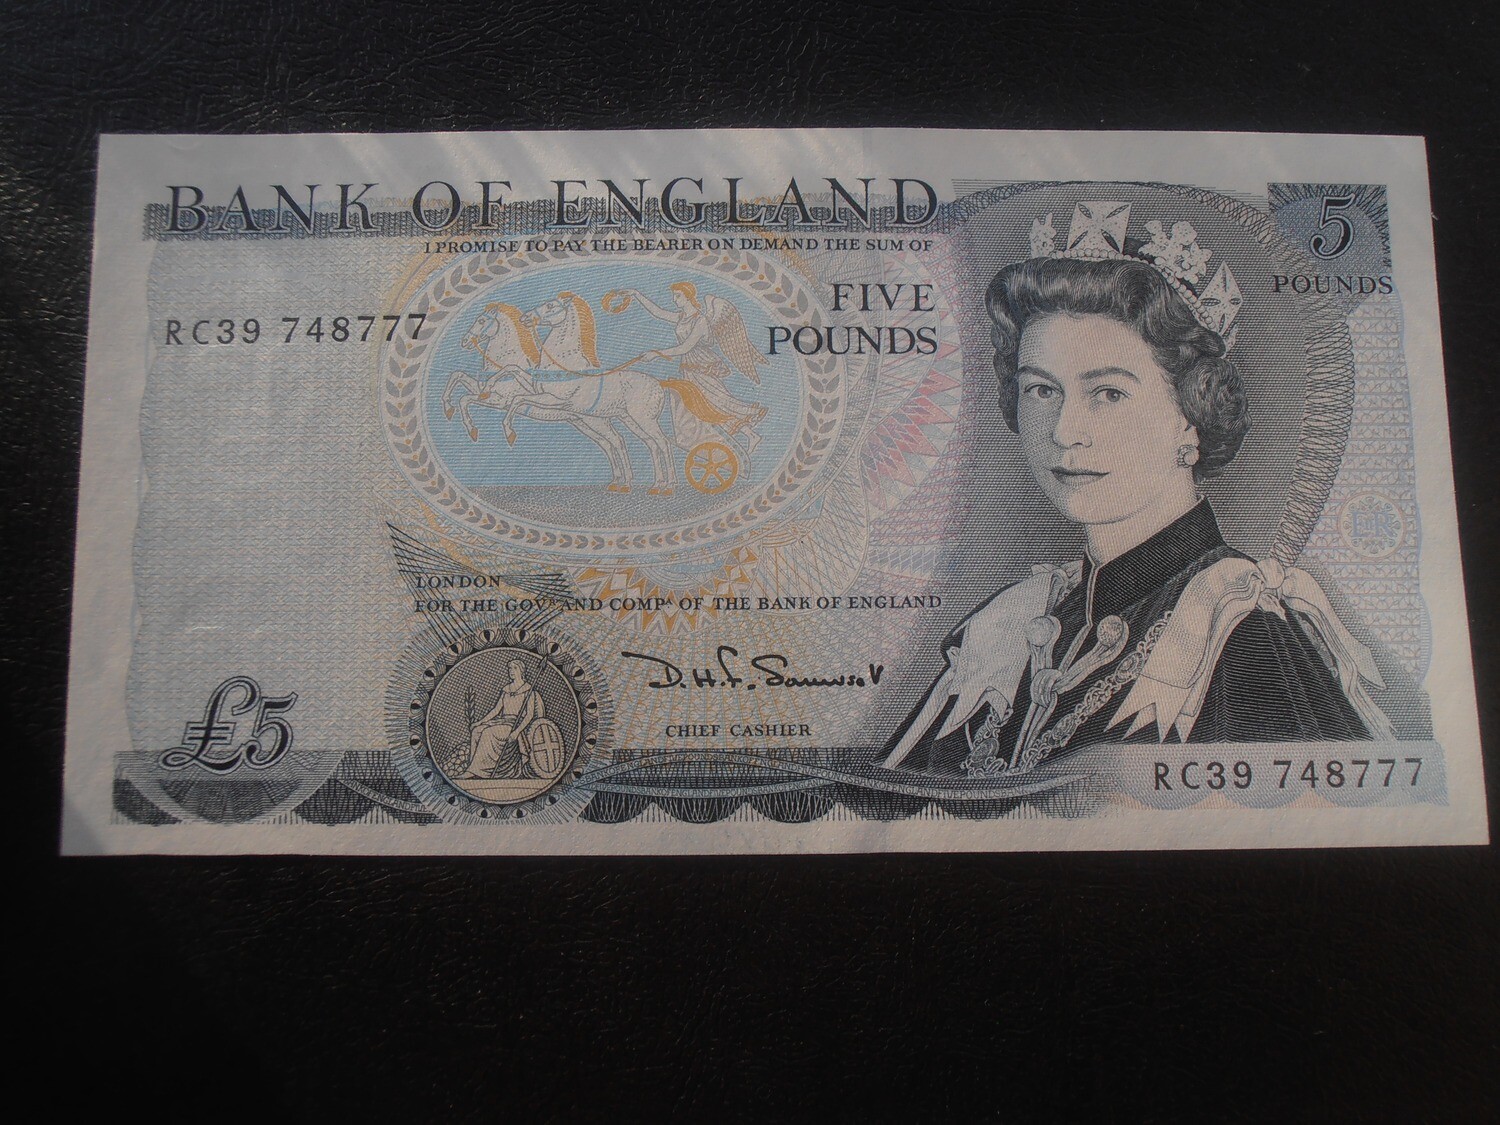 Bank of England £5 - From July 1987